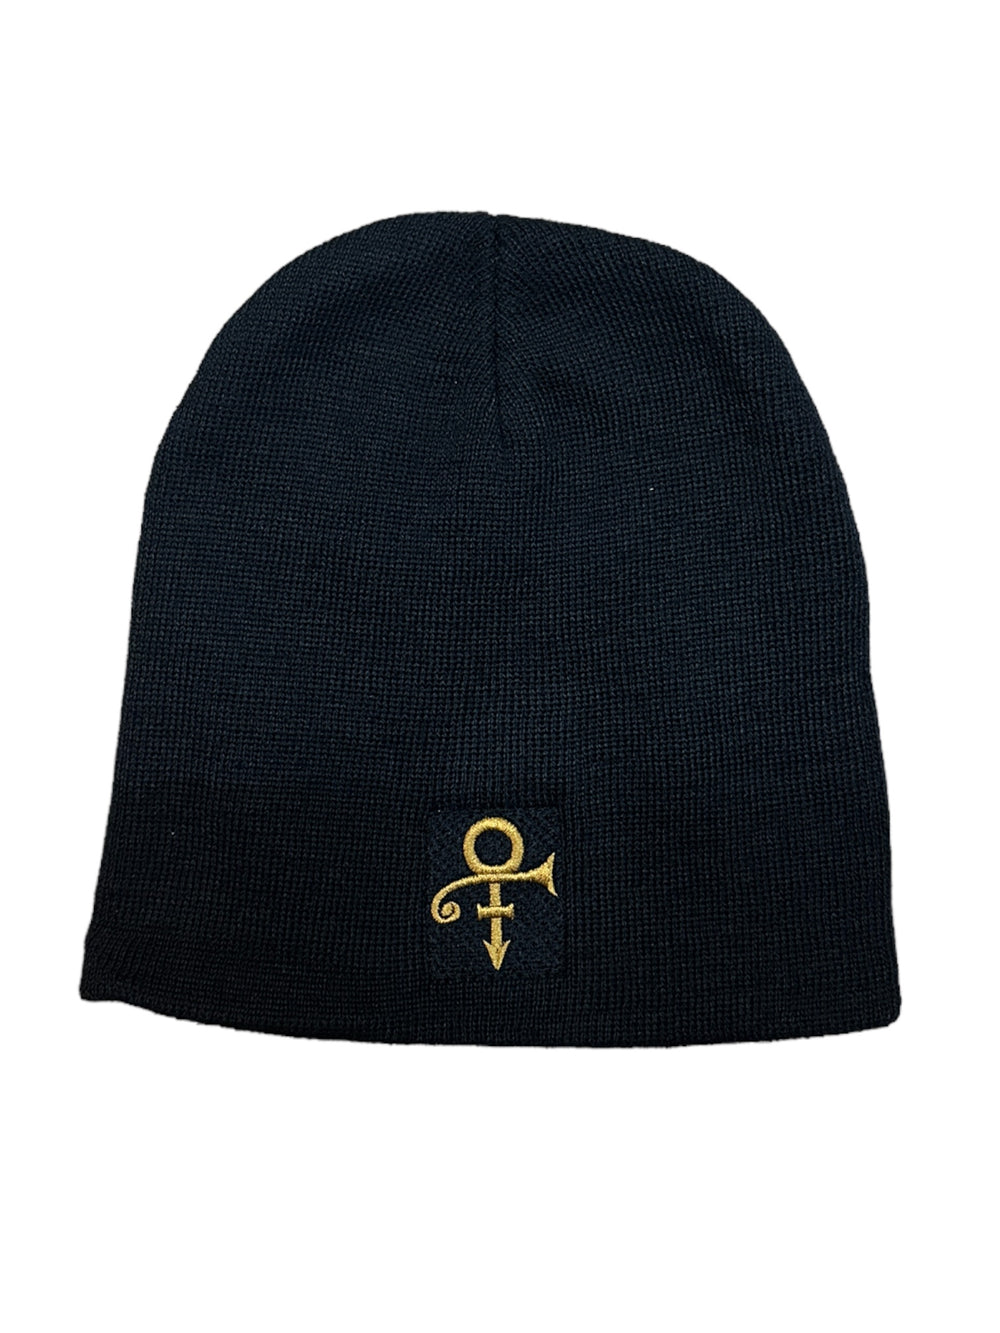 Prince – Love Symbol Beanie Hat Gold Thread Embroidery Official & Xclusive: NEW